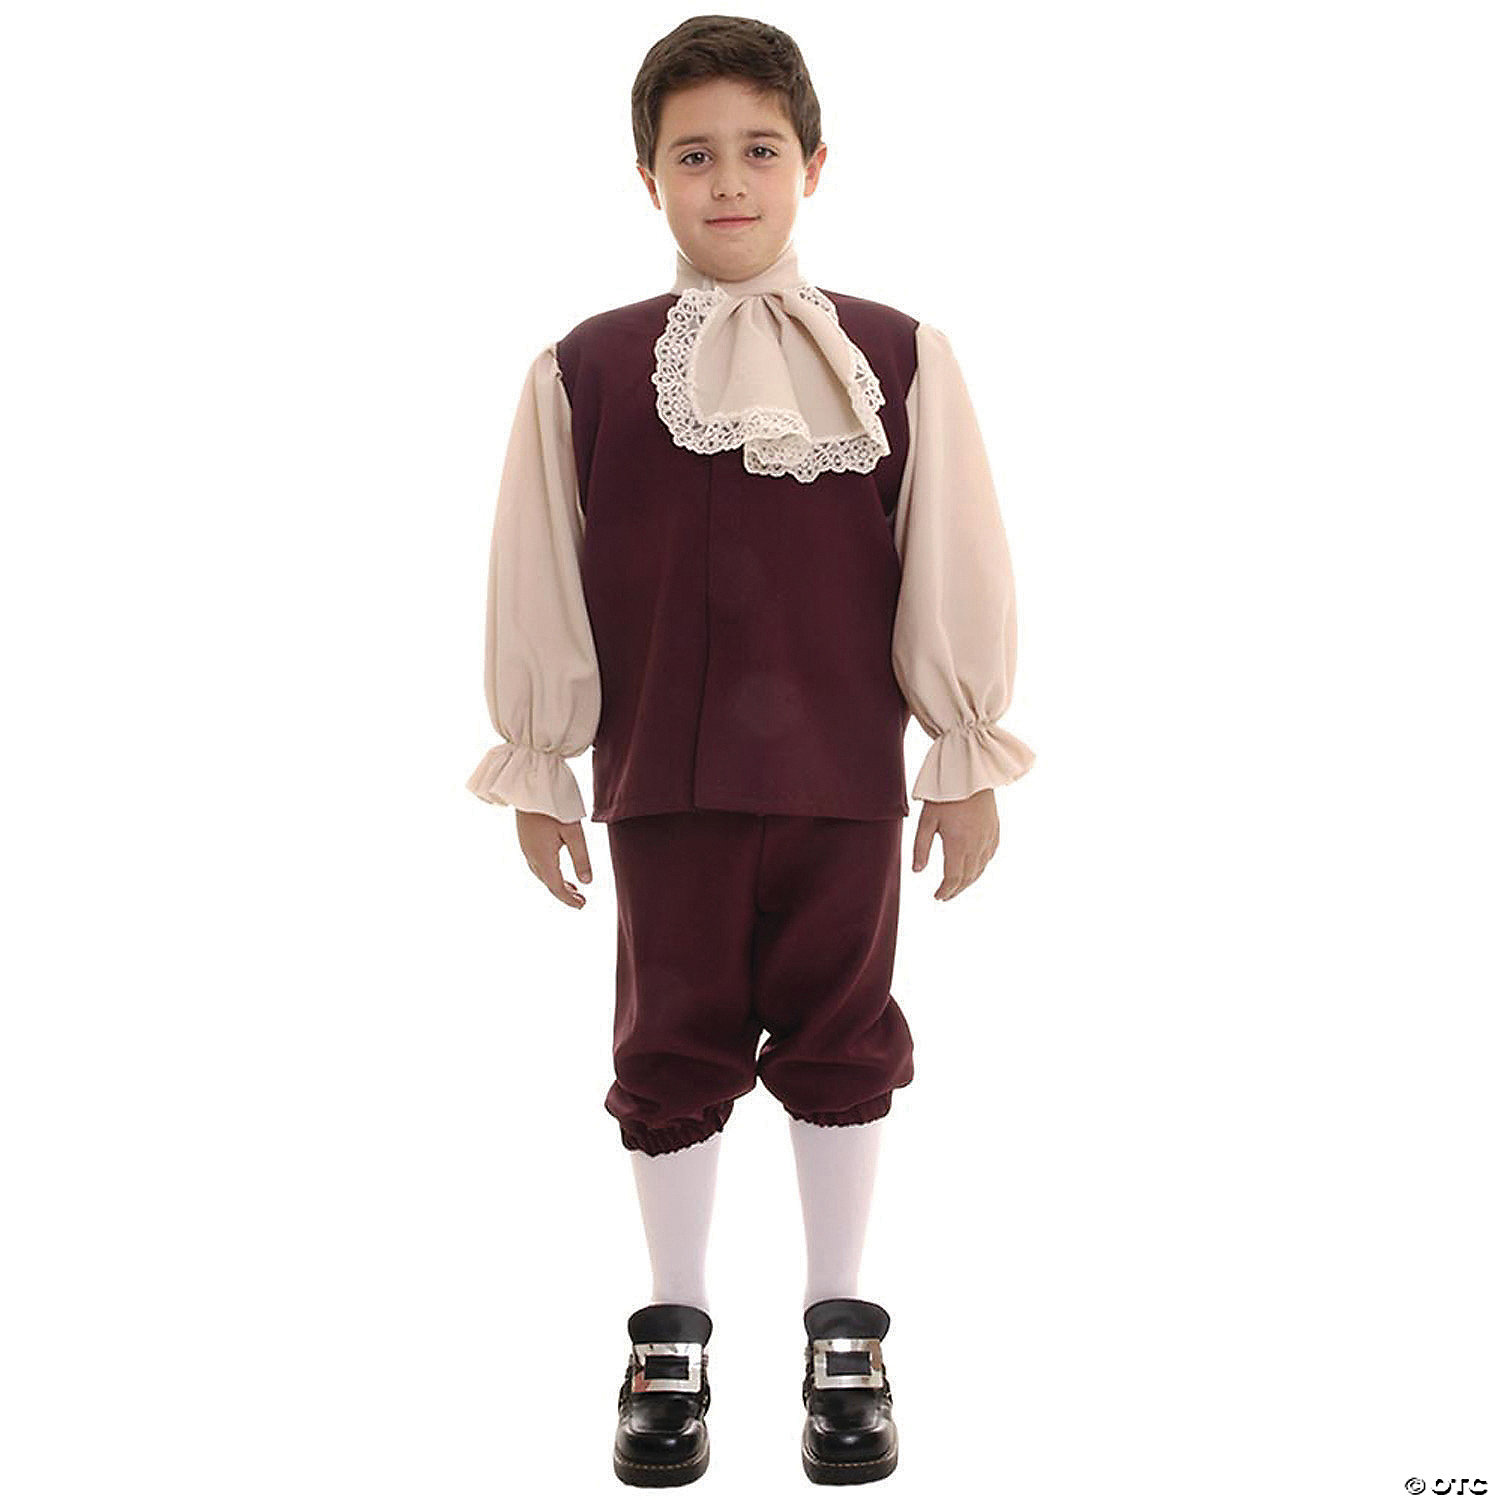 Boy's Colonial Costume | Oriental Trading